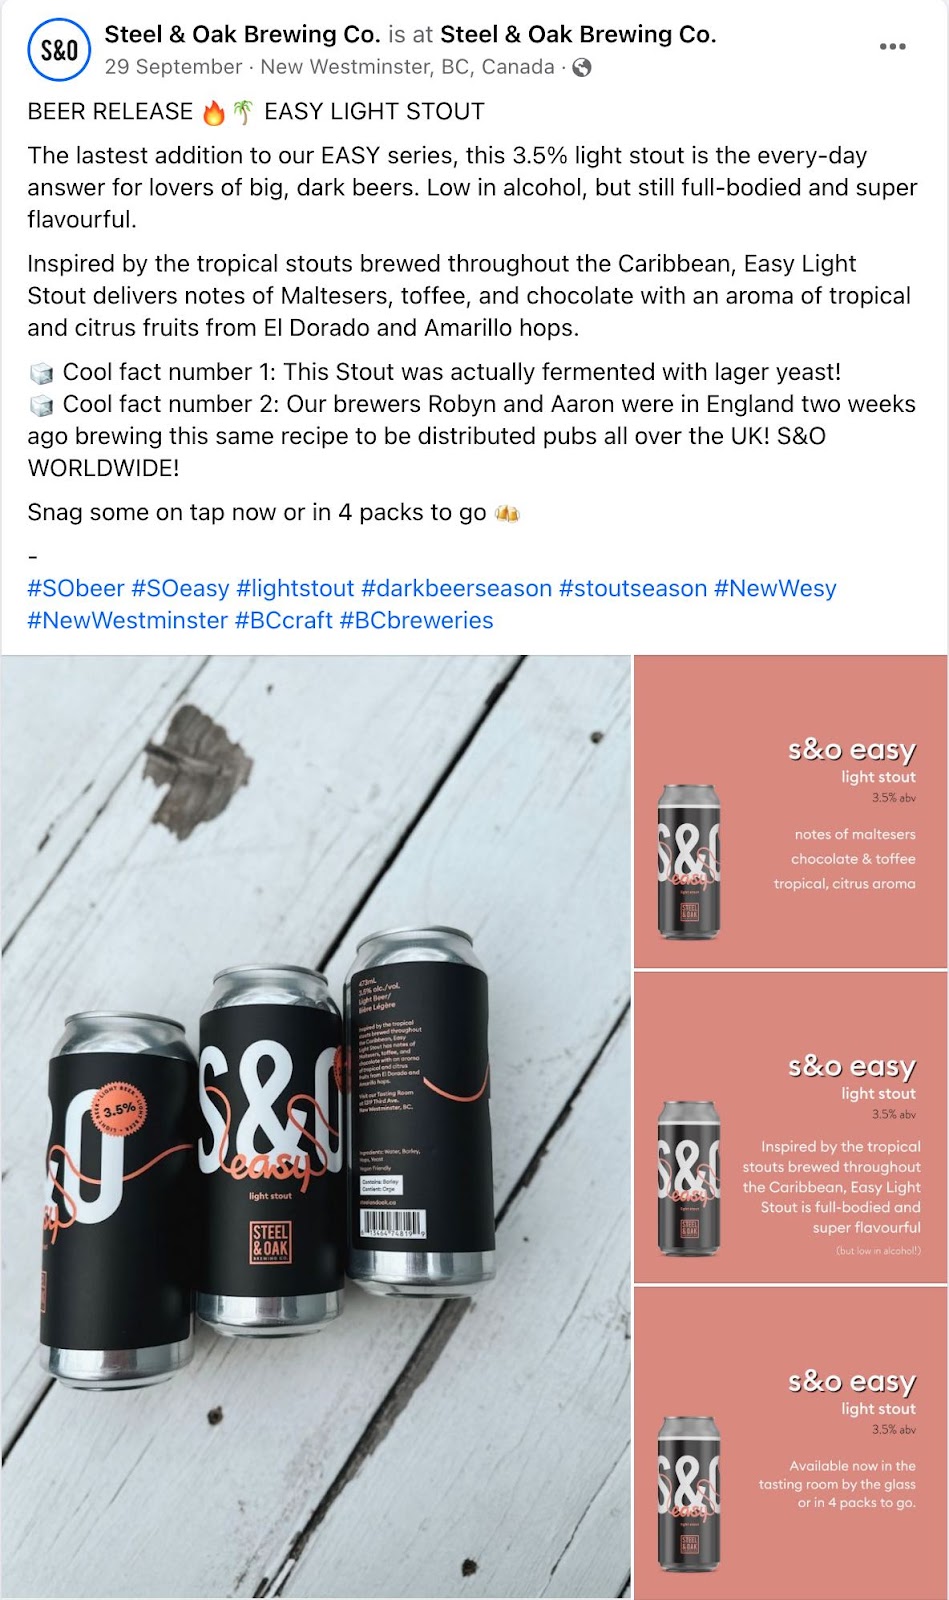 Steel & Oak's Facebook post on launching a new stout